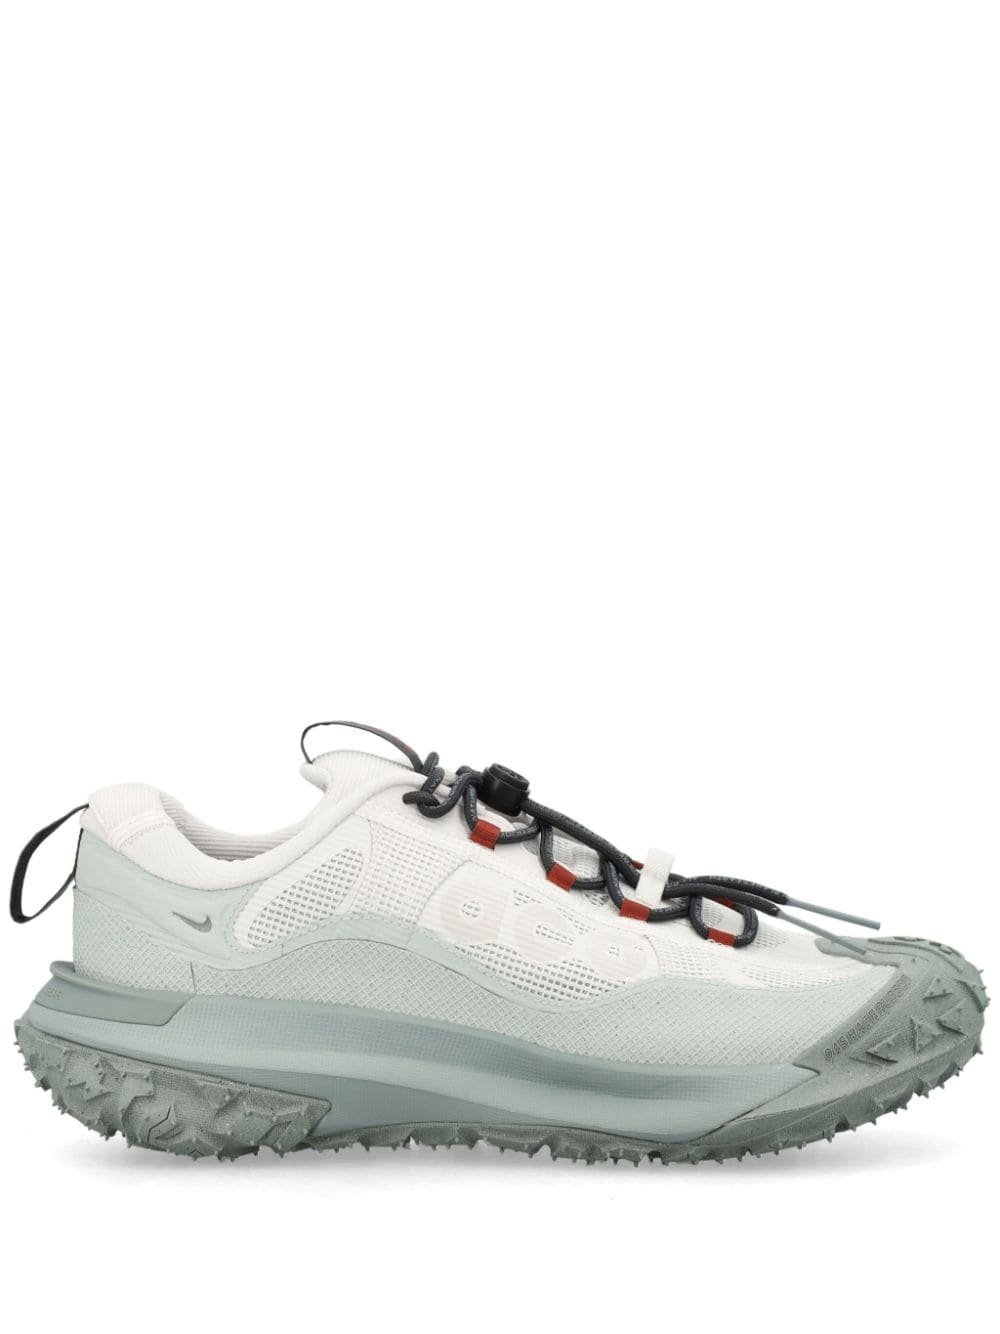 Nike ACG Mountain Fly 2 Low GORE-TEX sneakers - 1